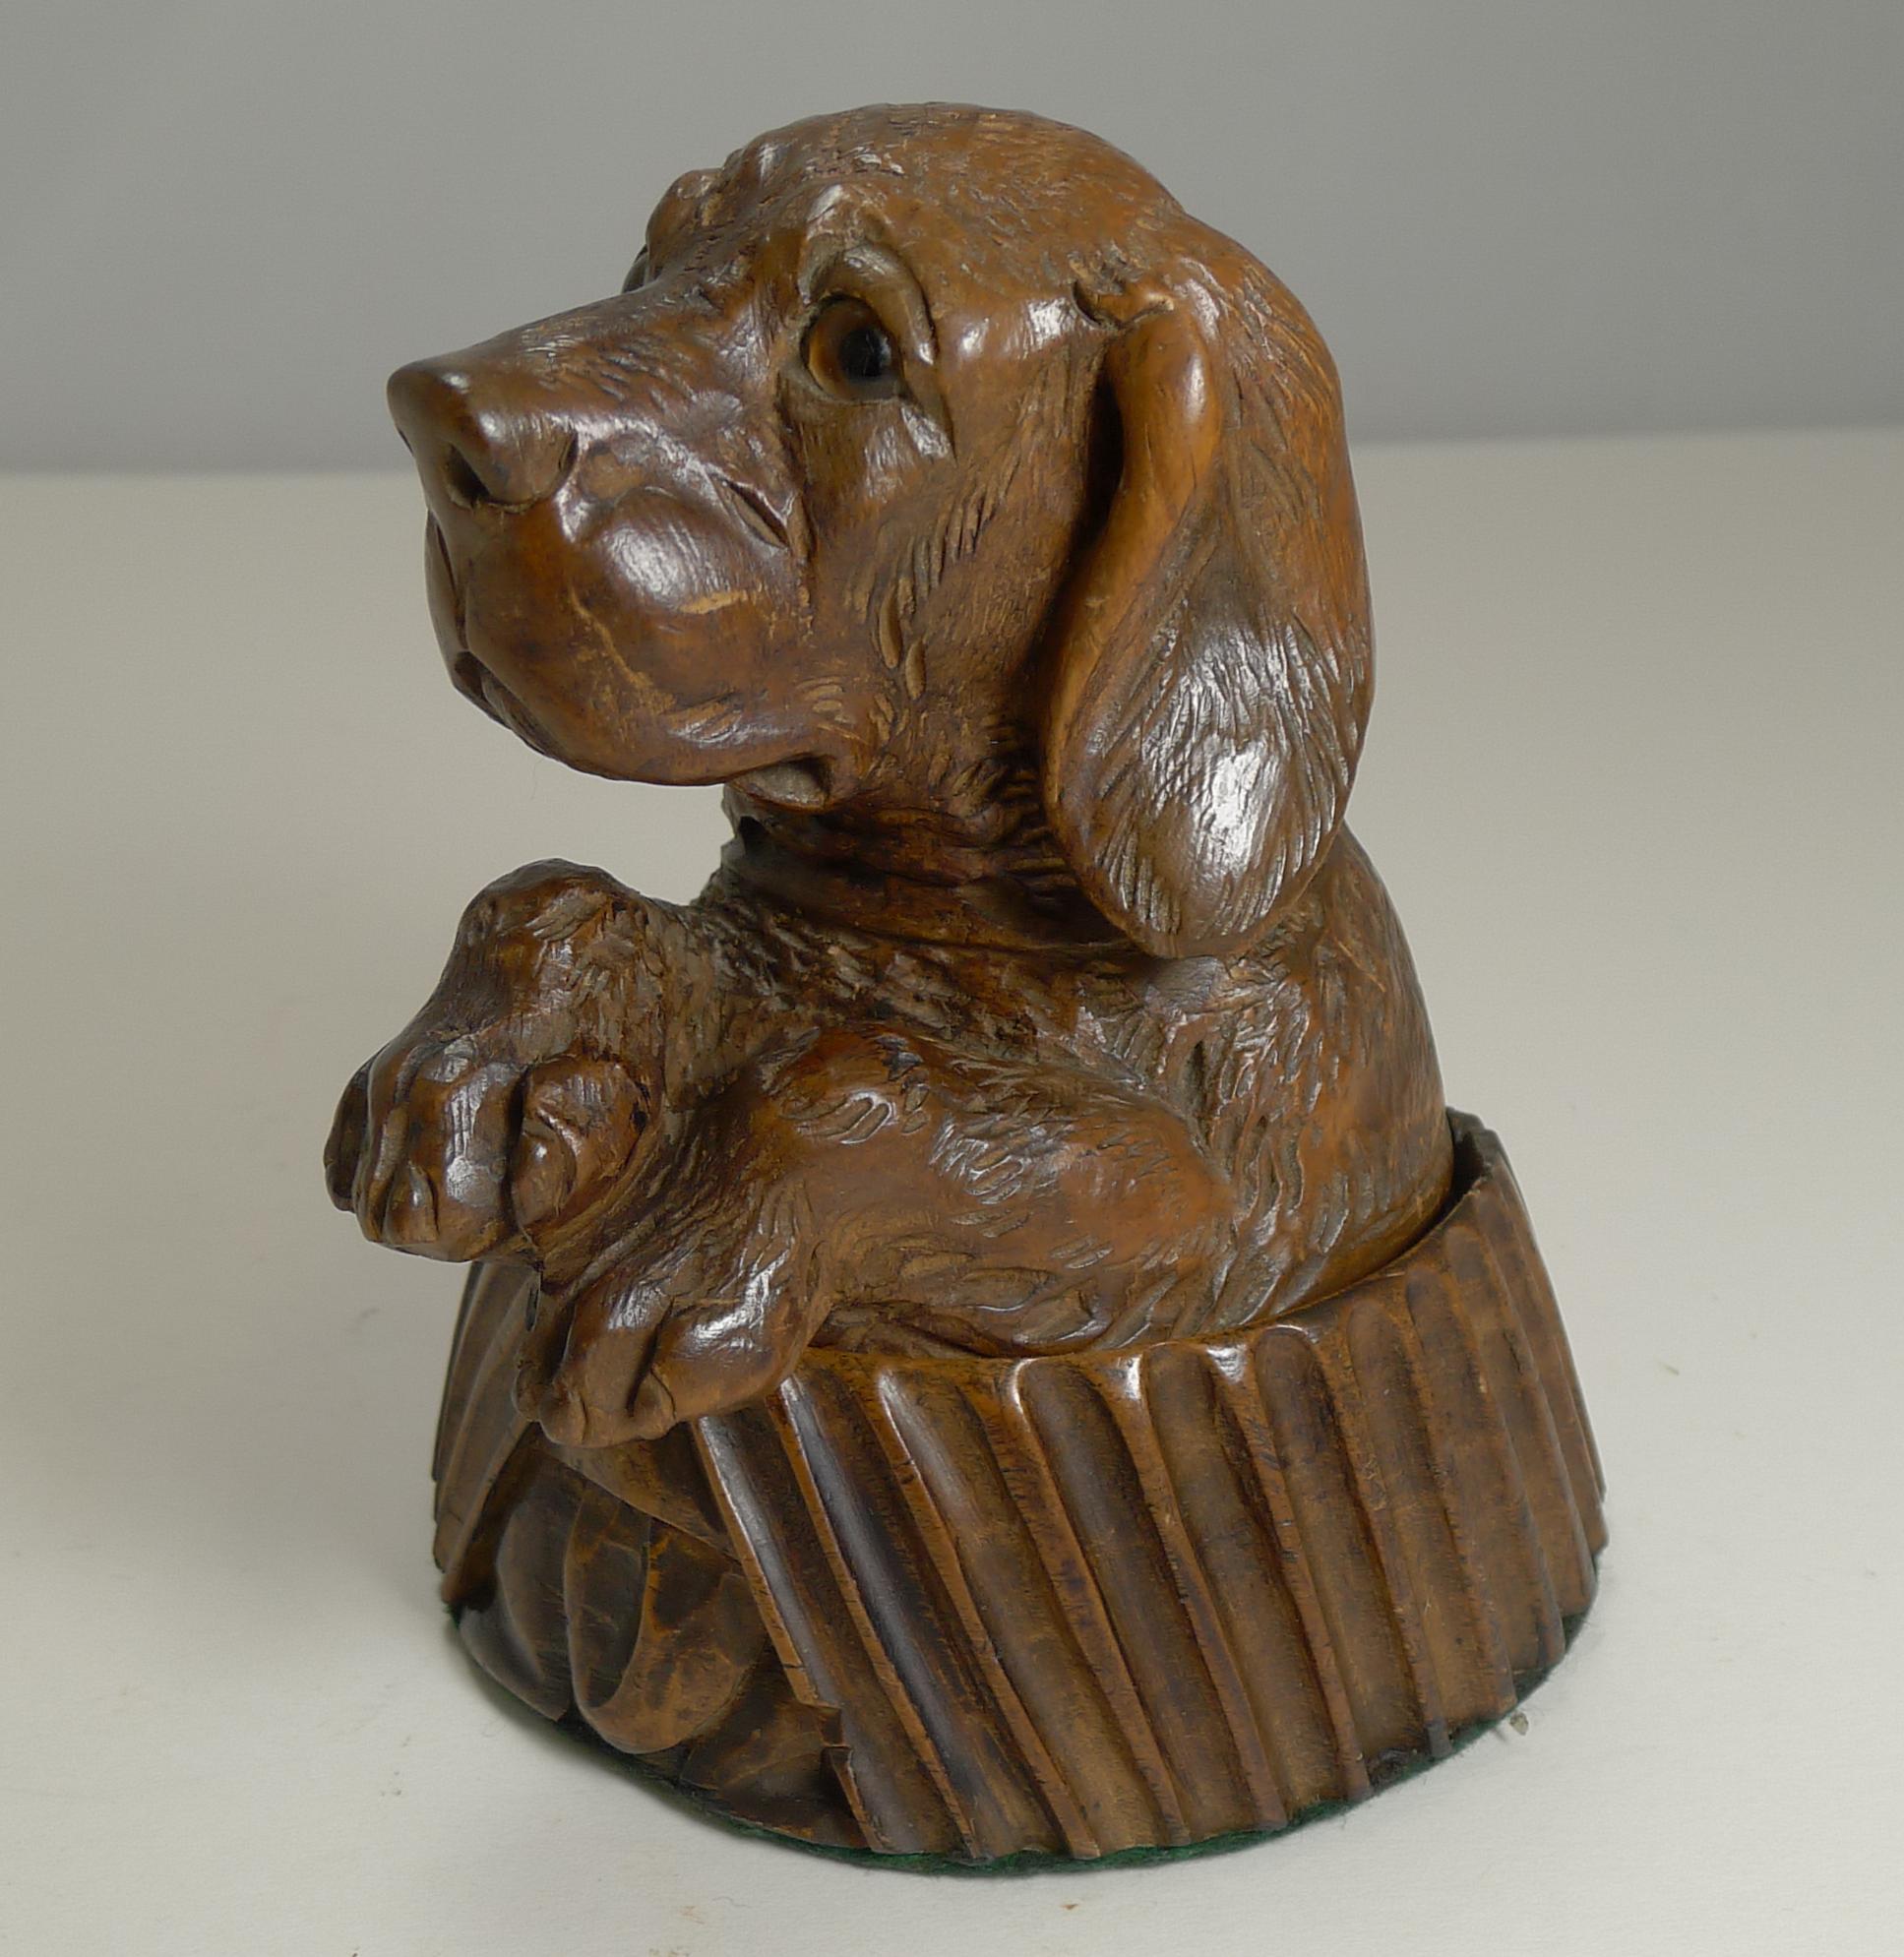 A beautifully carved novelty Victorian inkwell from the Victorian era, having been made in the Black Forest region. The dog has the most lovely face, made better with his two wonderful glass eyes.

The hinged lid lifts to reveal the cream ceramic